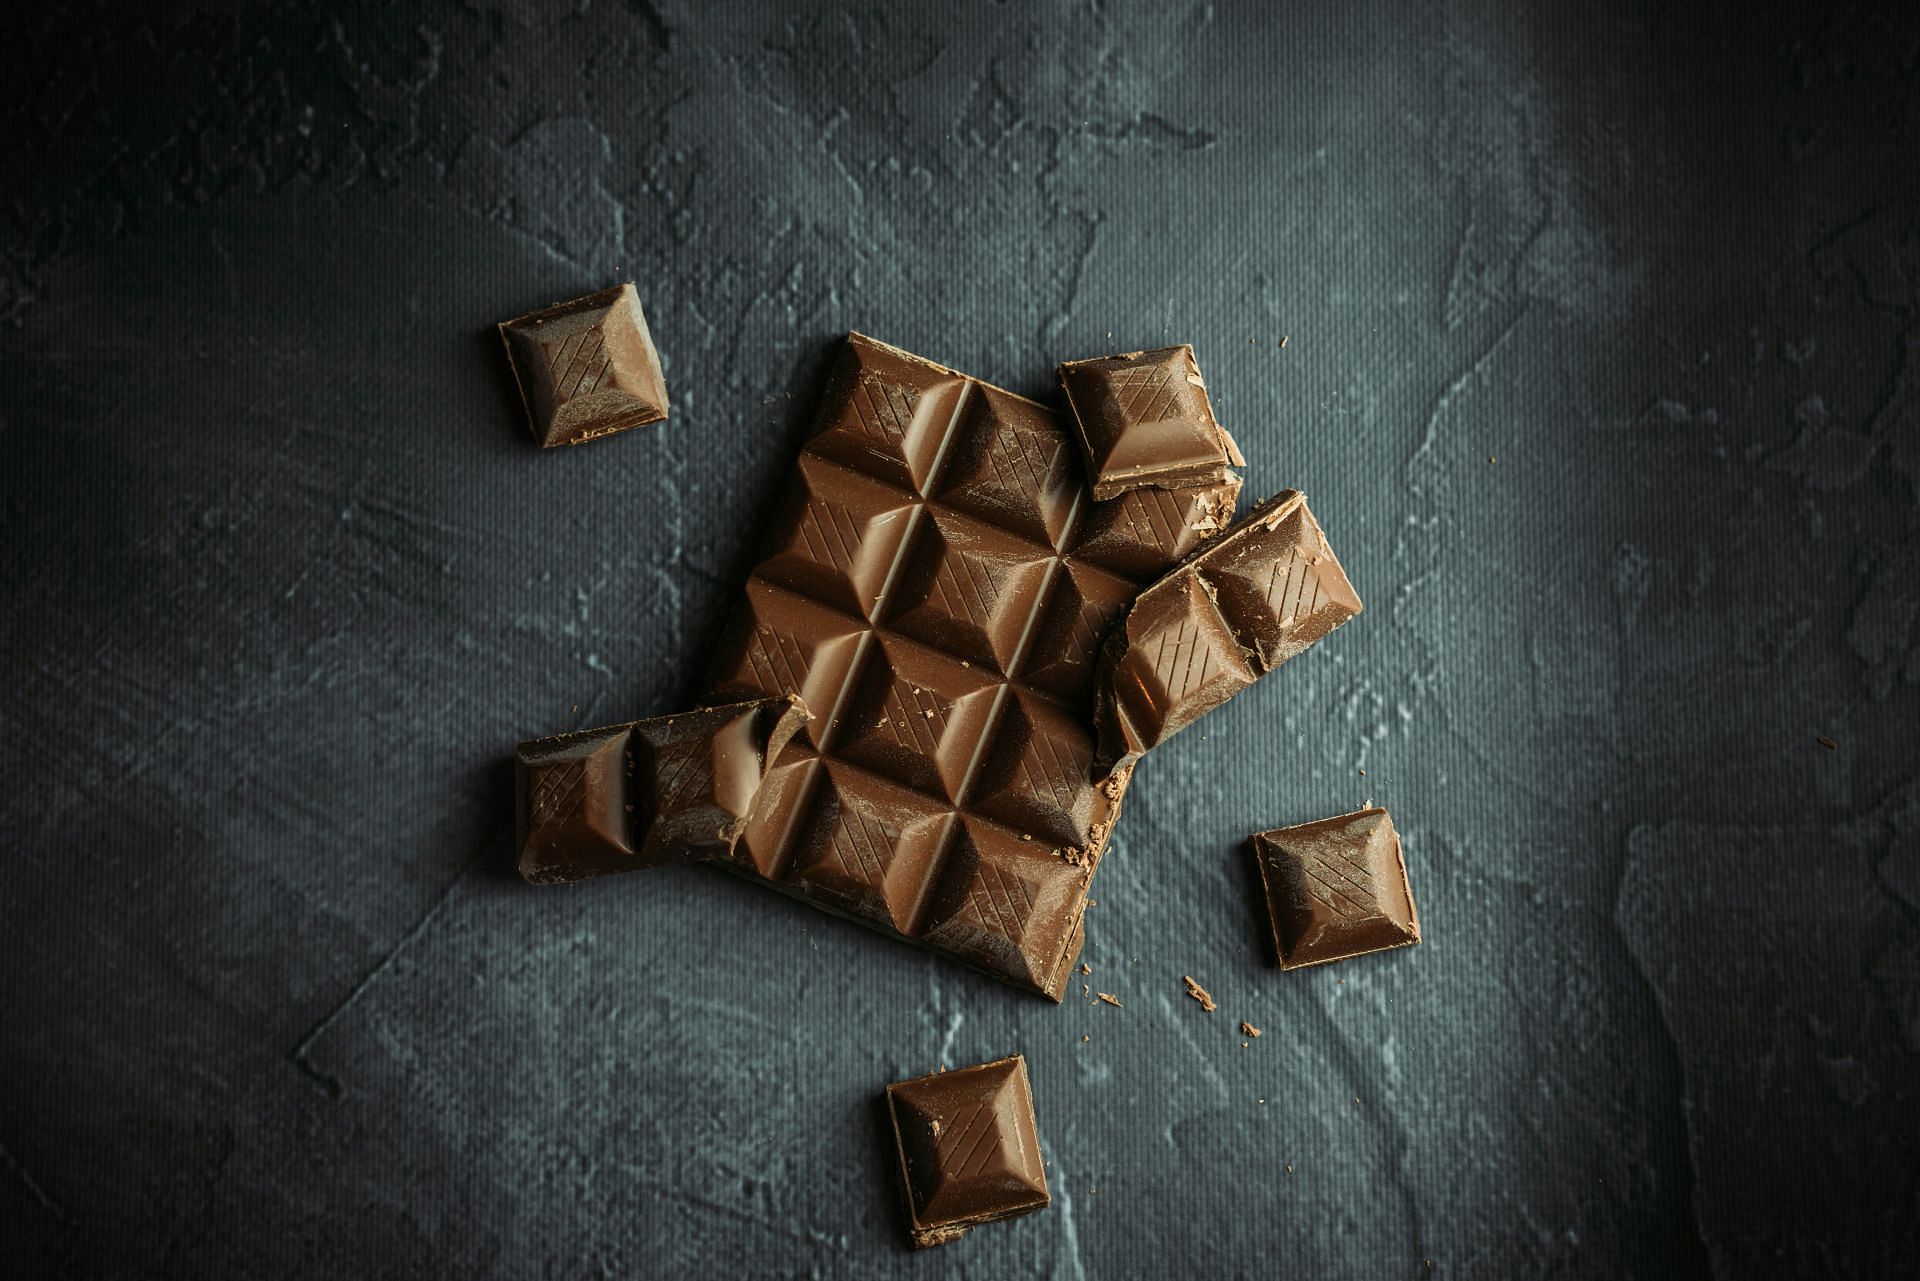 Dark chocolate vs milk chocolate,which one should you have? (Image by Tamas Pap/Unsplash)